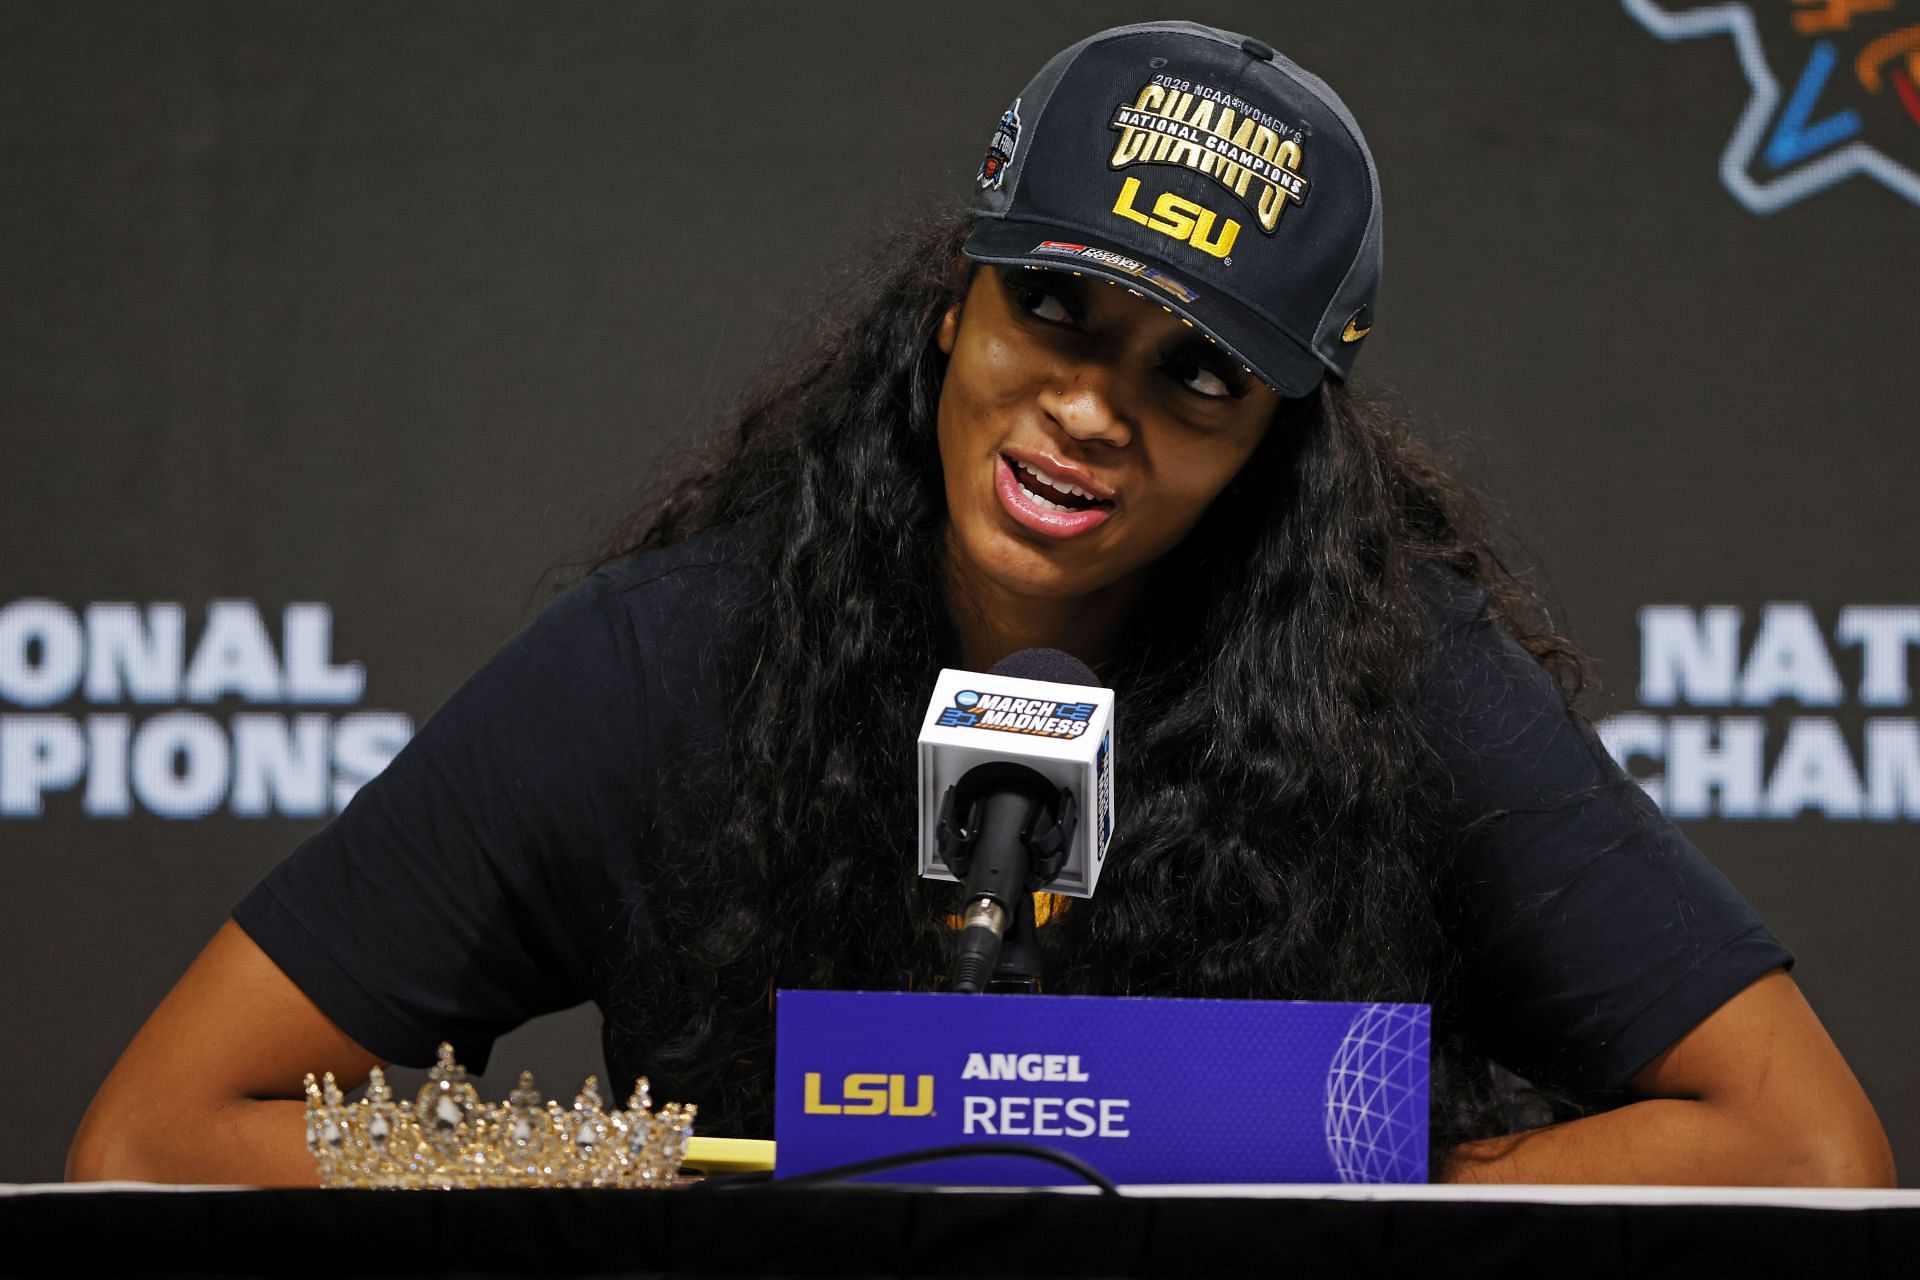 Did Angel Reese get drafted? Taking a closer look at the current career